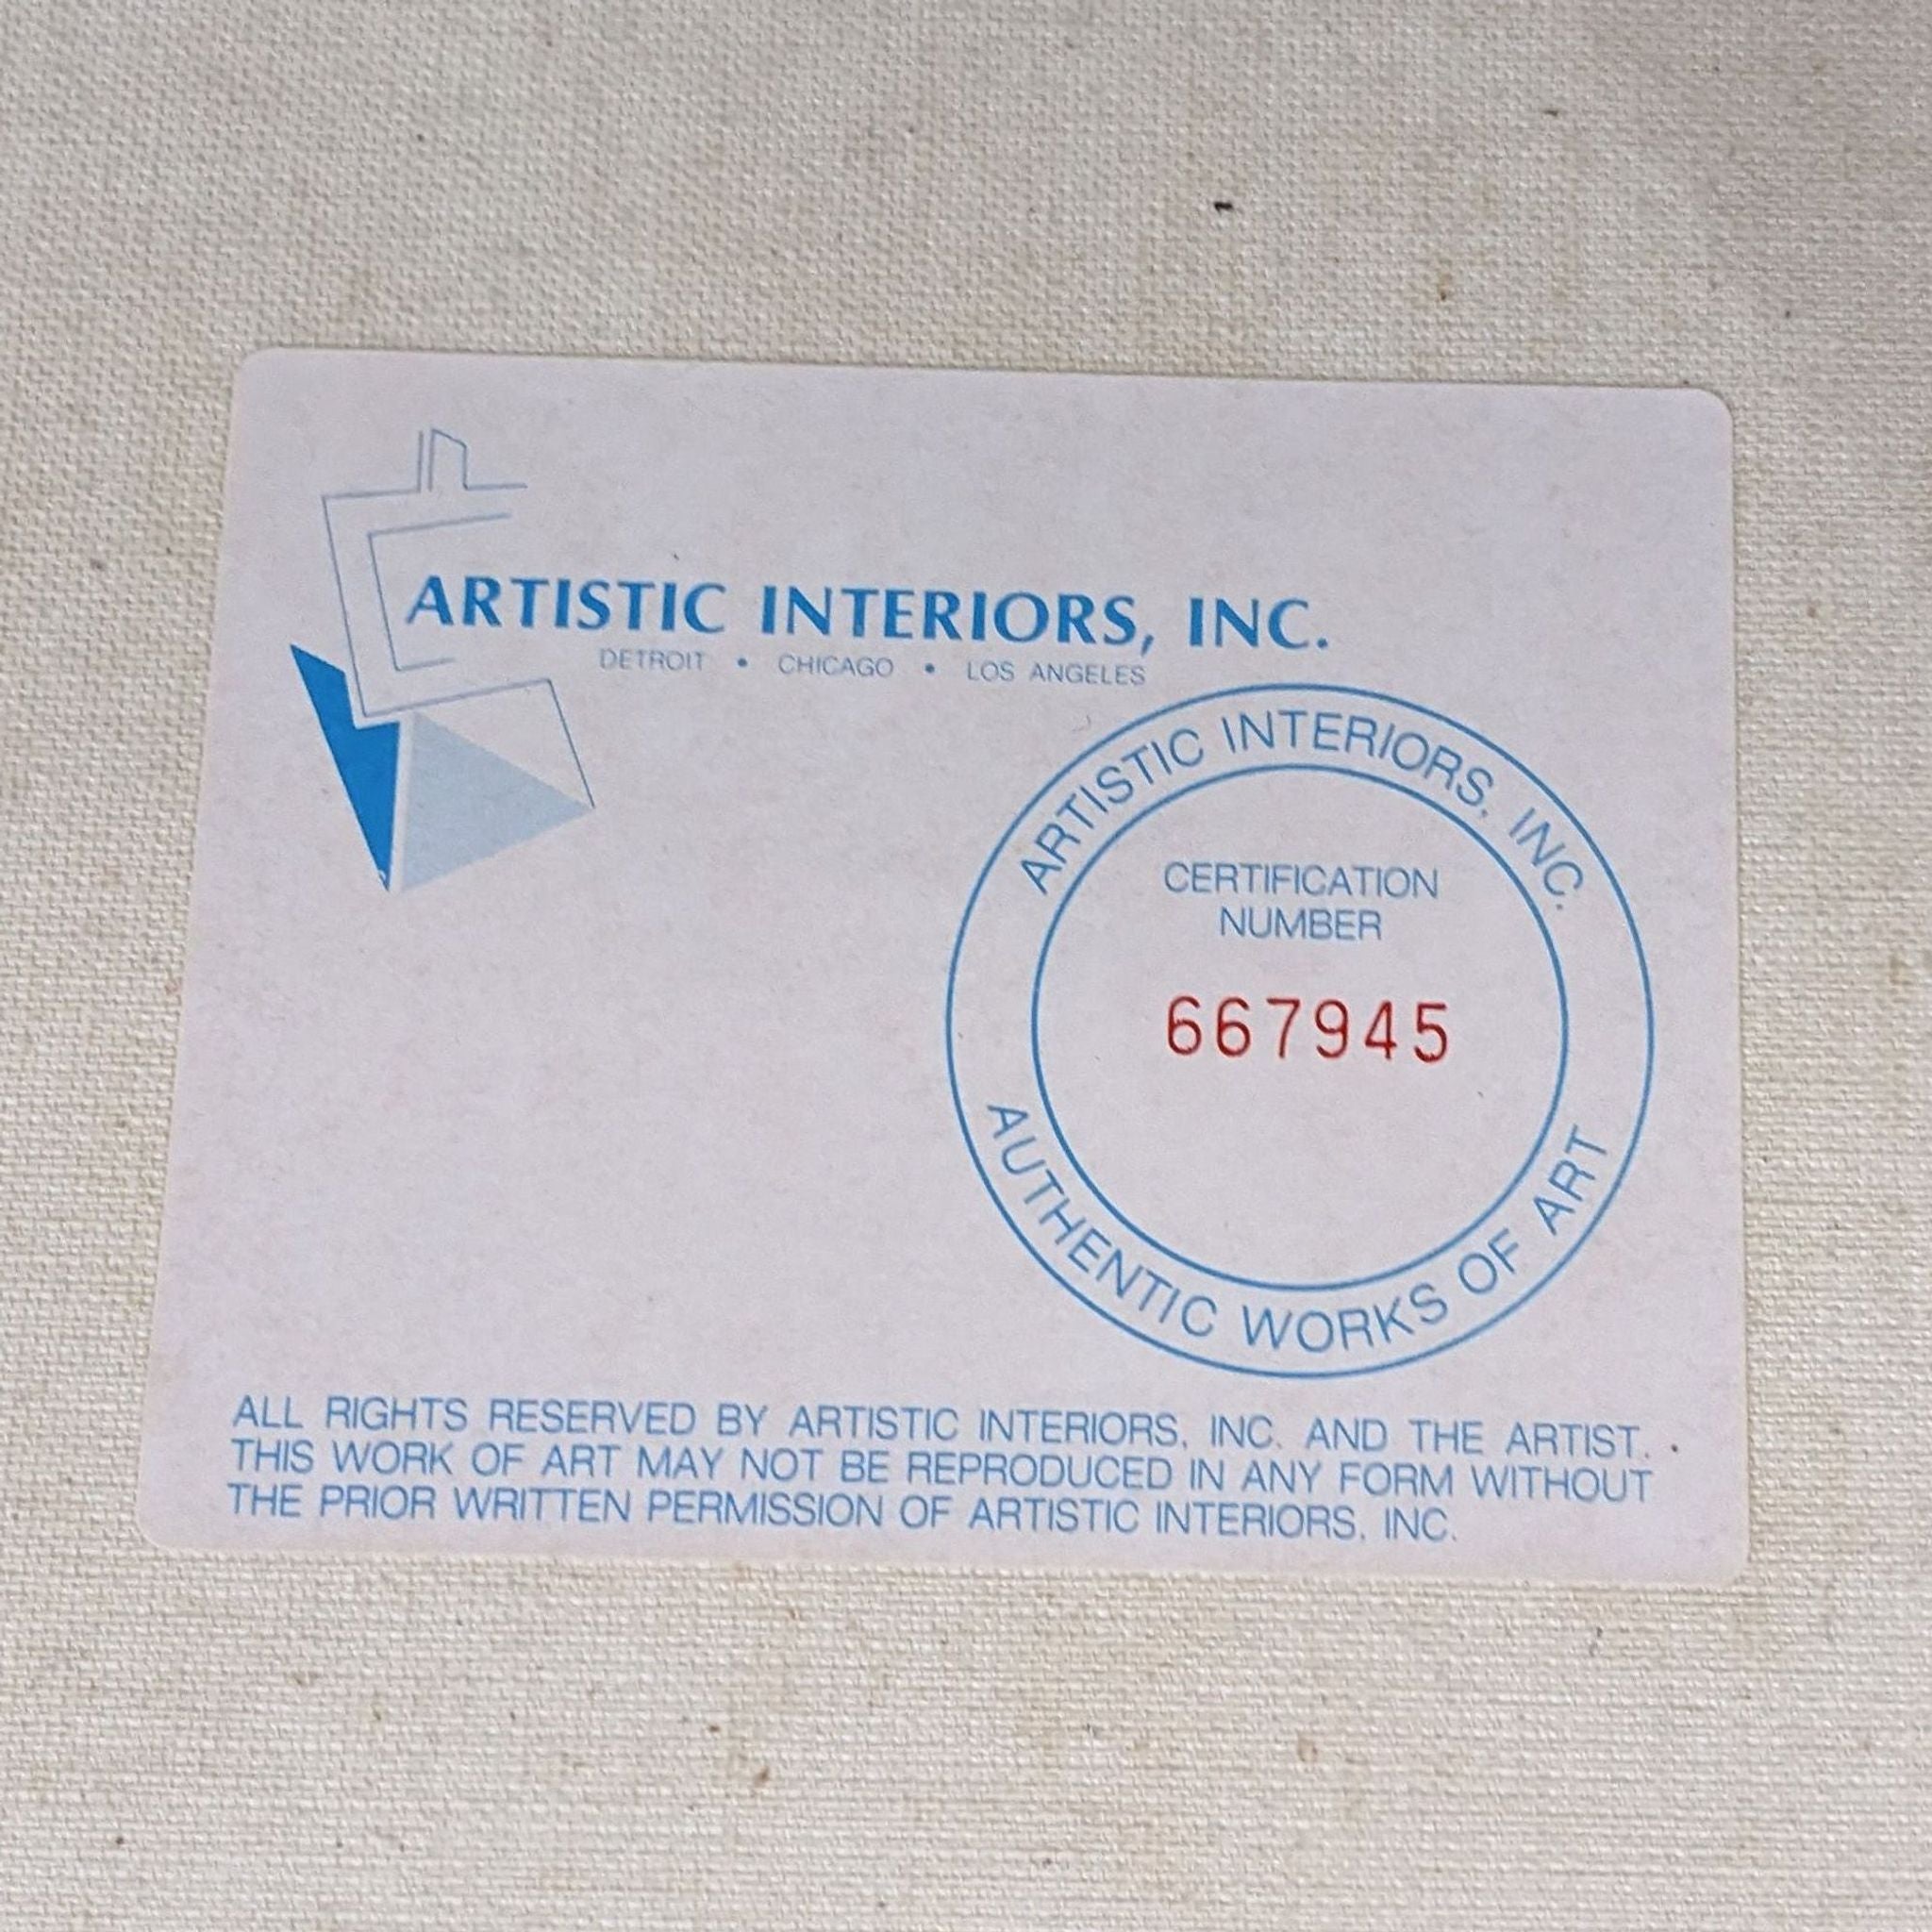 Artistic Interiors certification card with a number indicating authenticity of a still life artwork by Reperch.